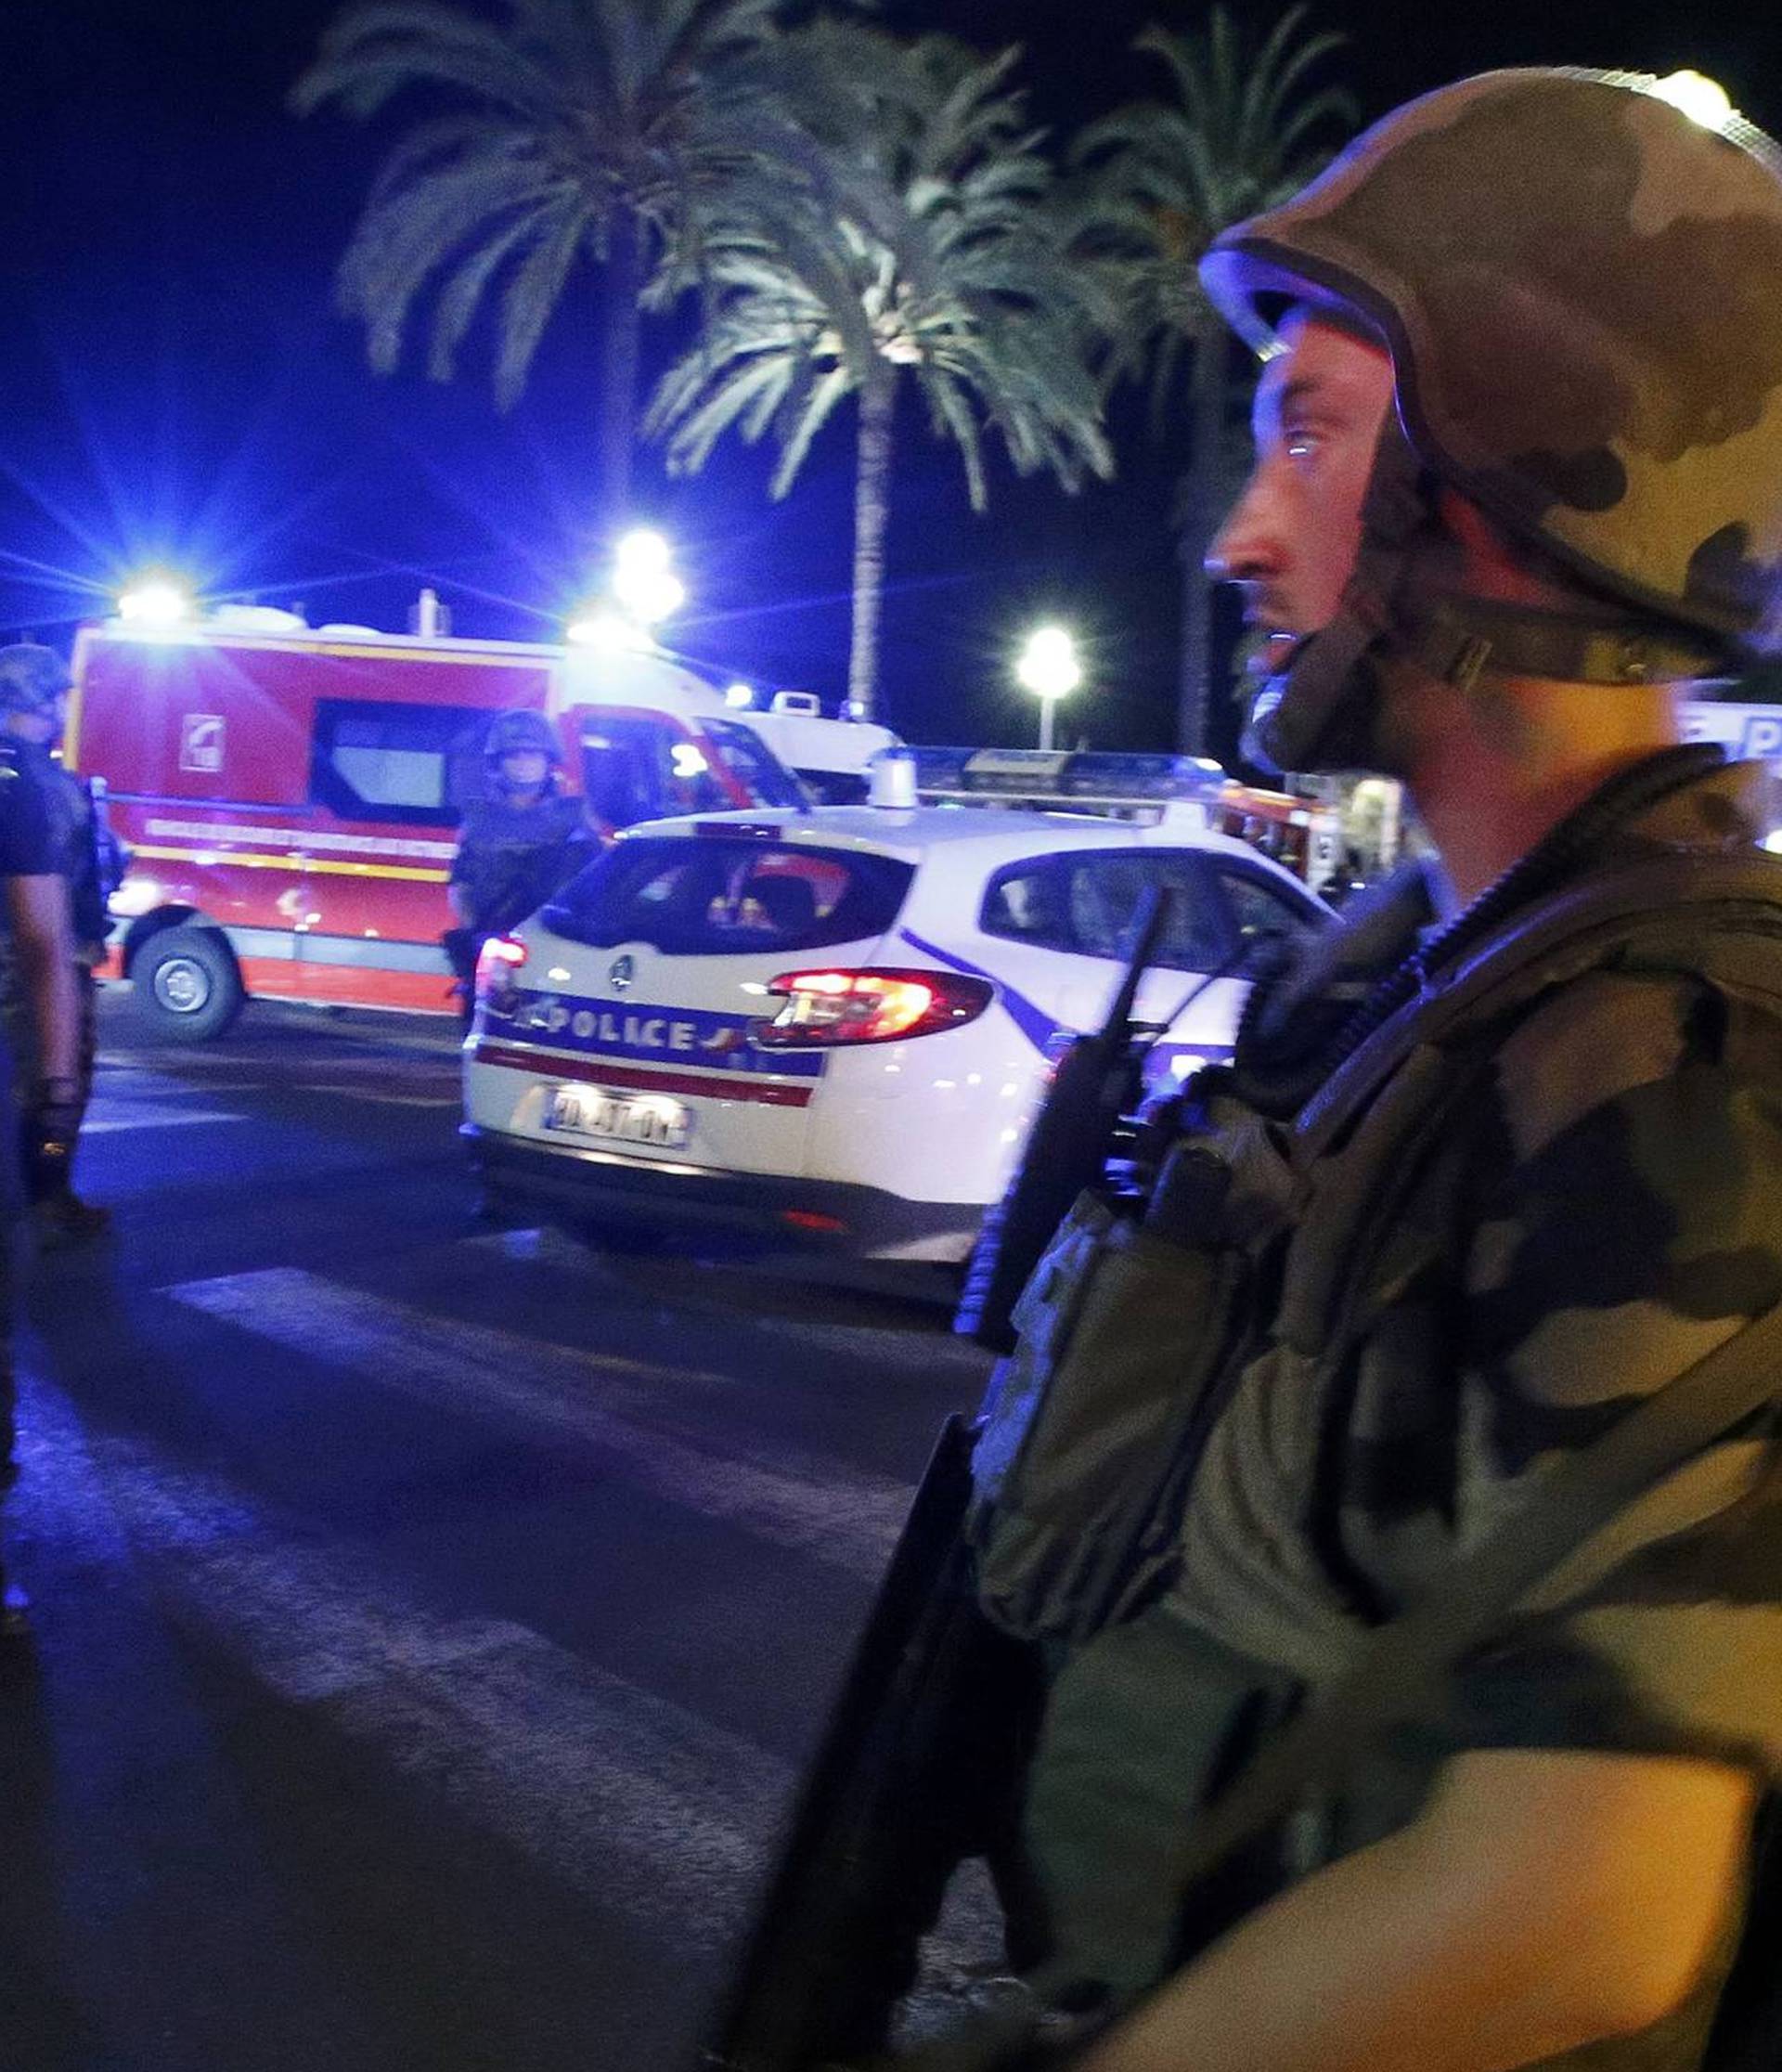 French soldiers cordon the area after at least 30 people were killed in Nice when a truck ran into a crowd celebrating the Bastille Day national holiday